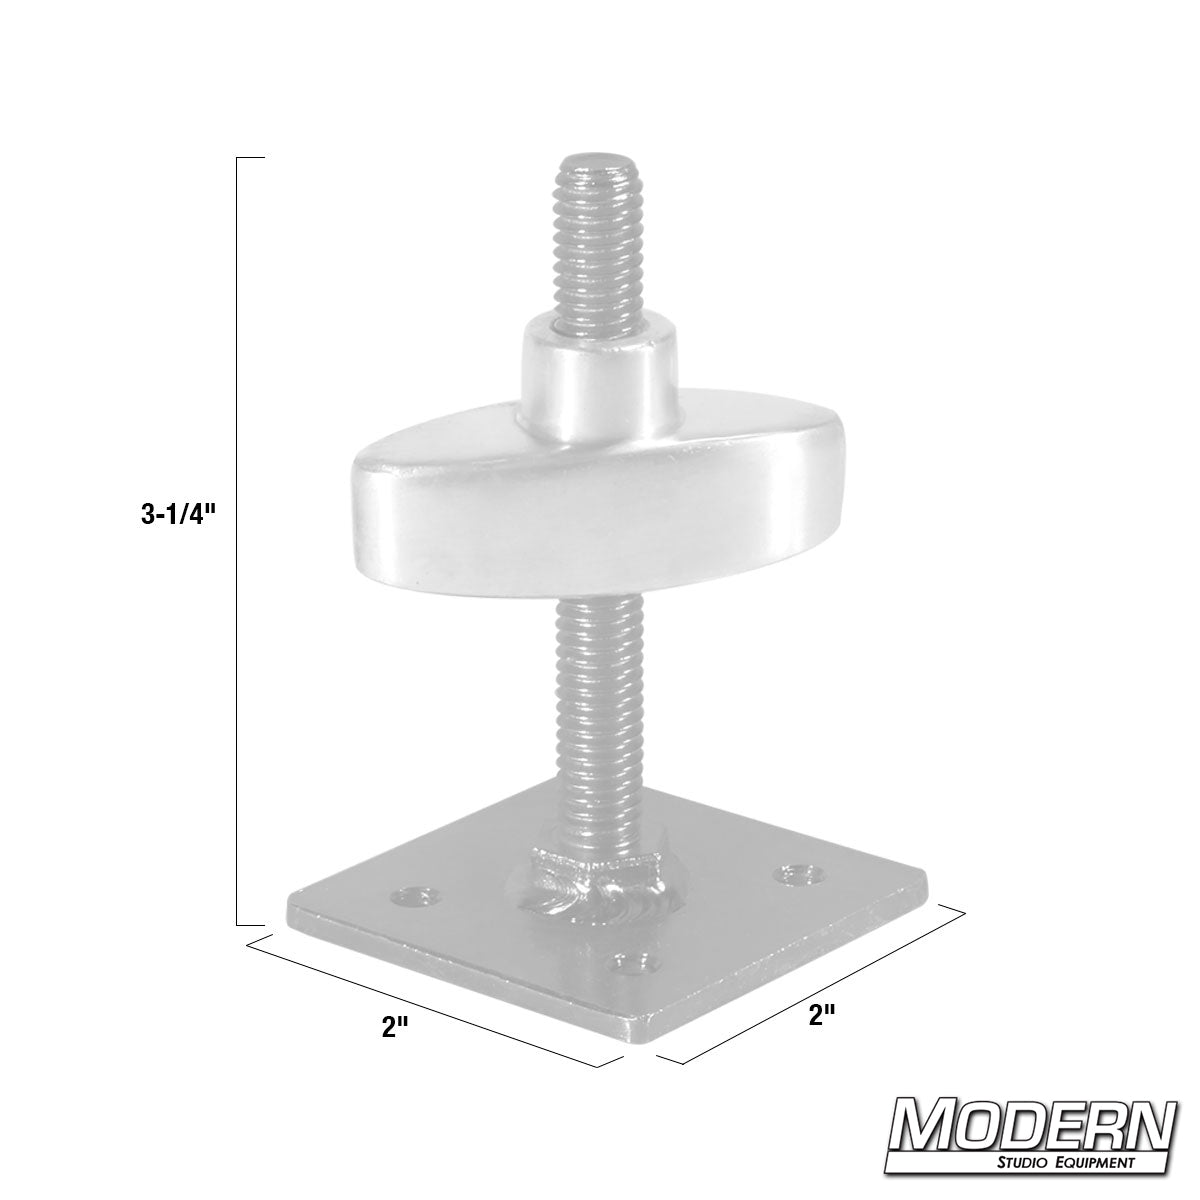 Screw Jack for 5/8" Wall spreader